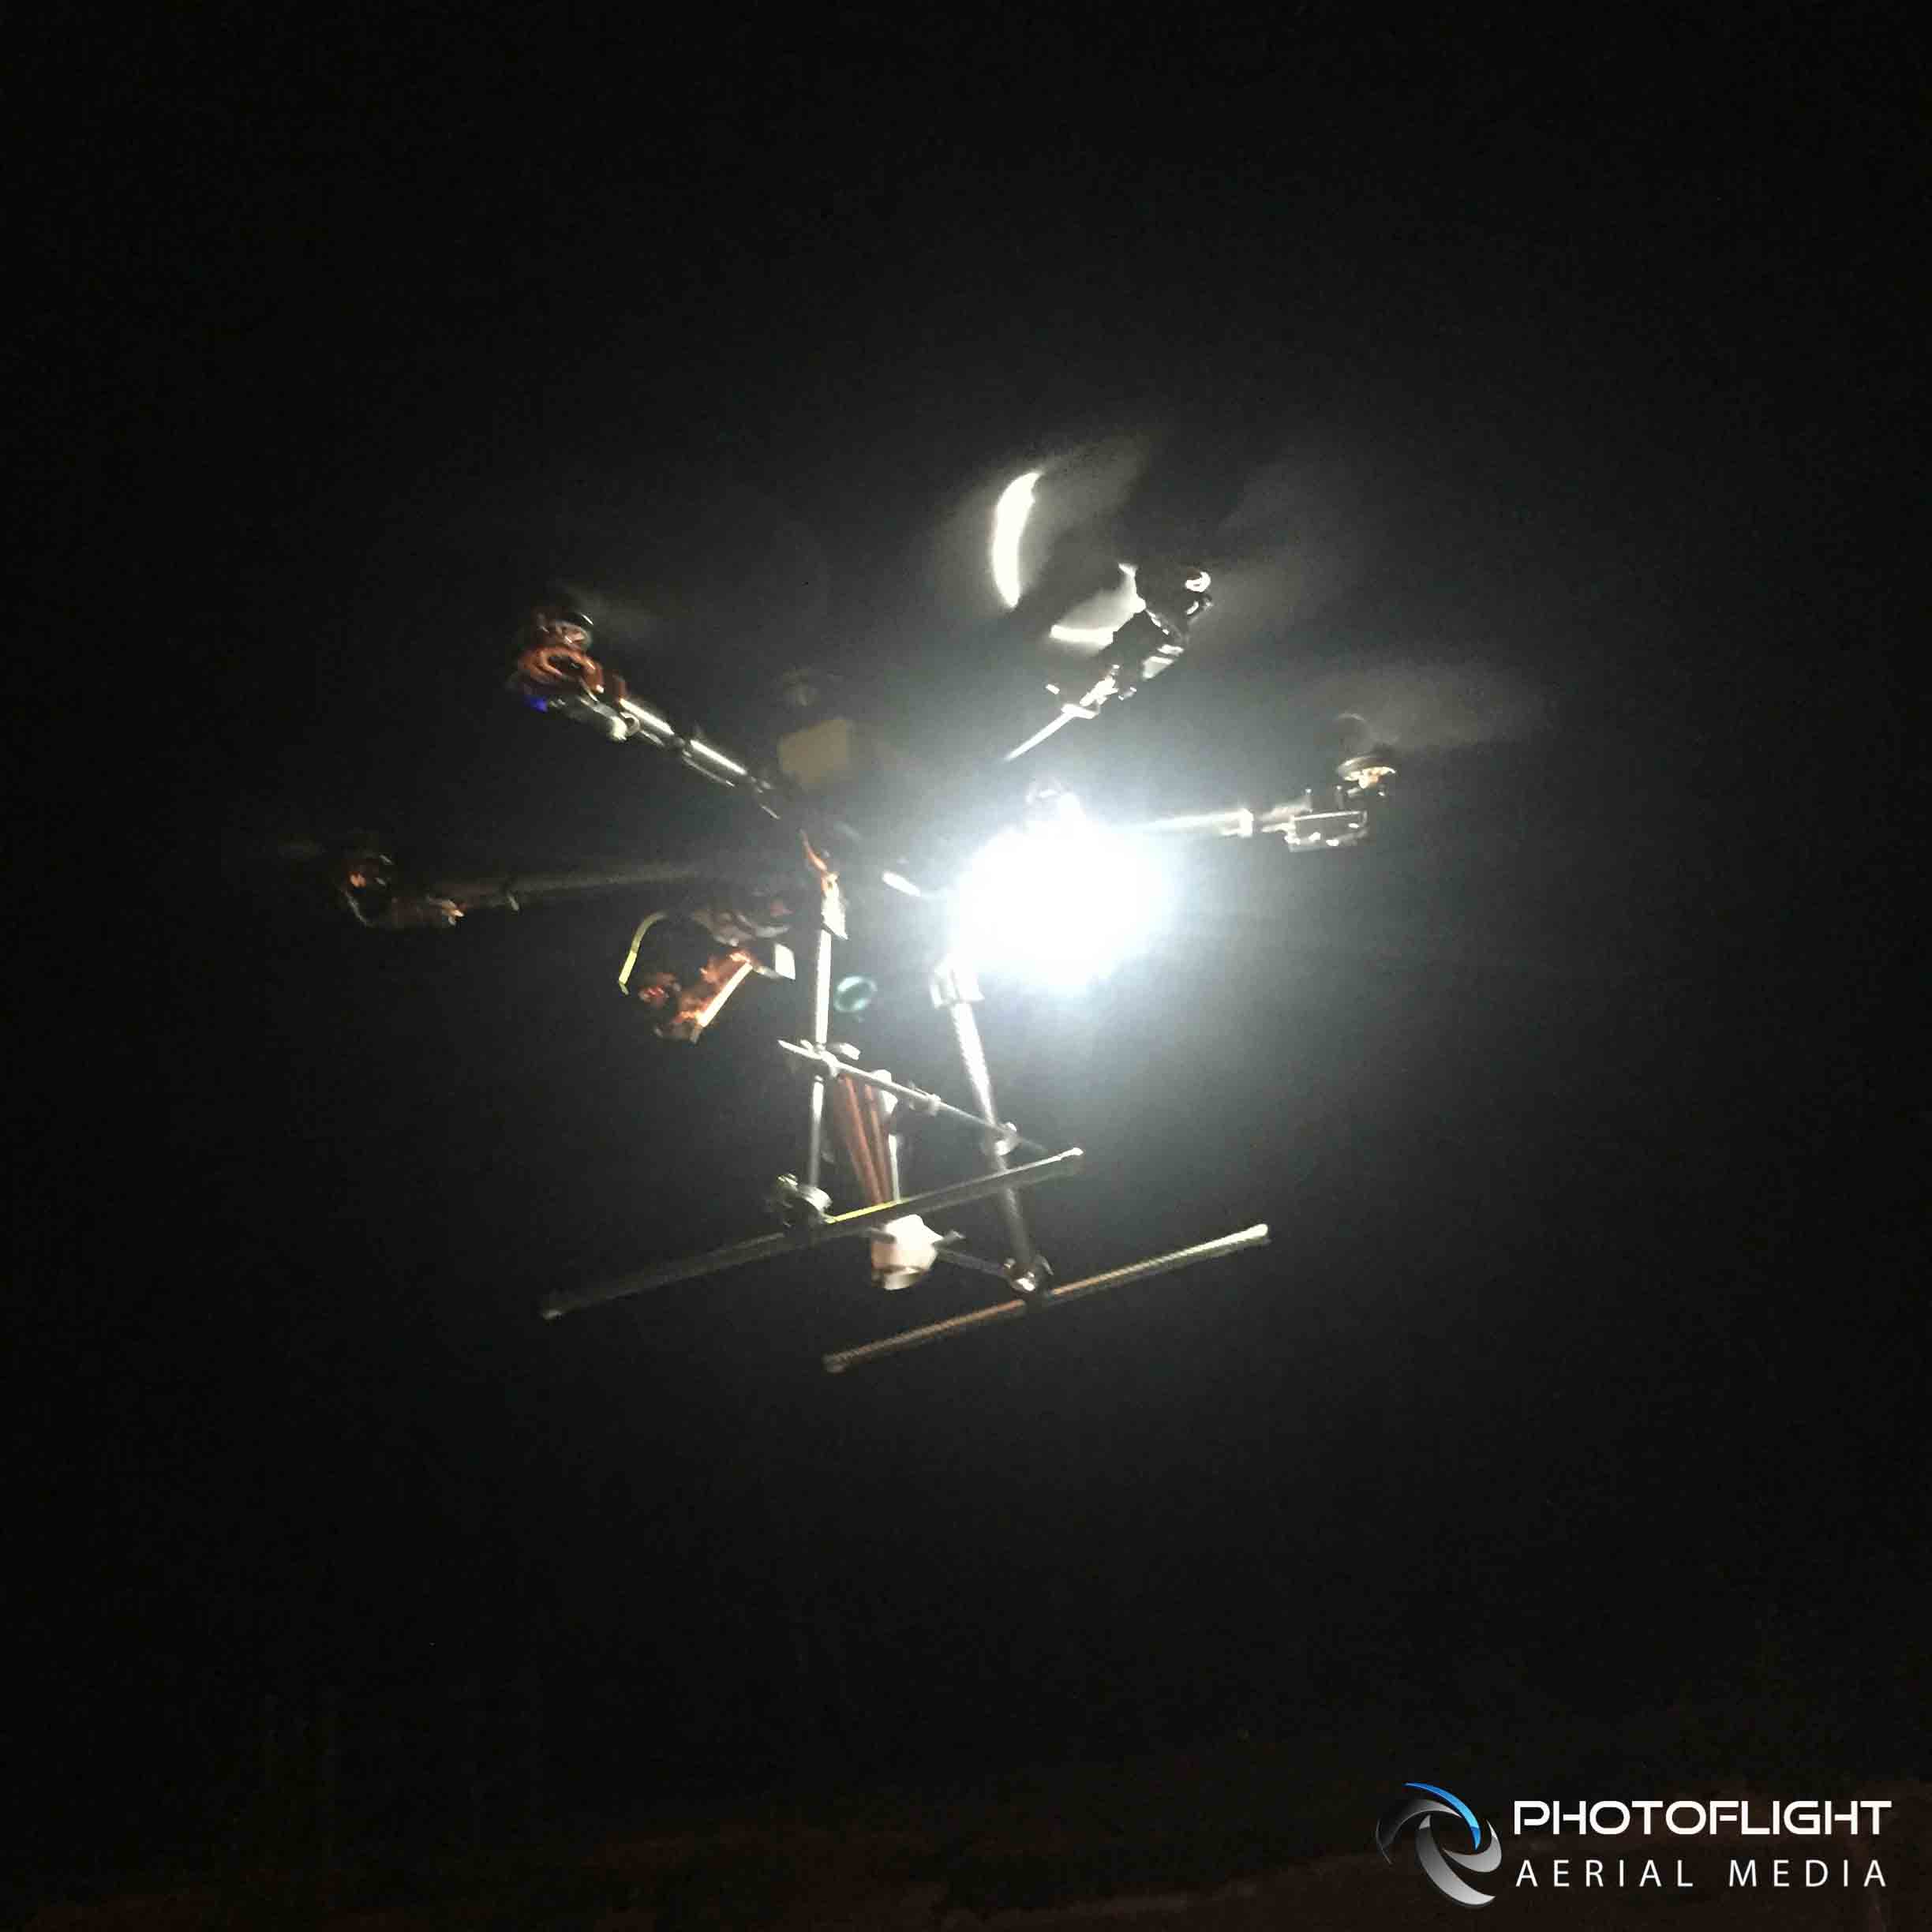 Dynamic Drone Light for Night Photography and Video Projects